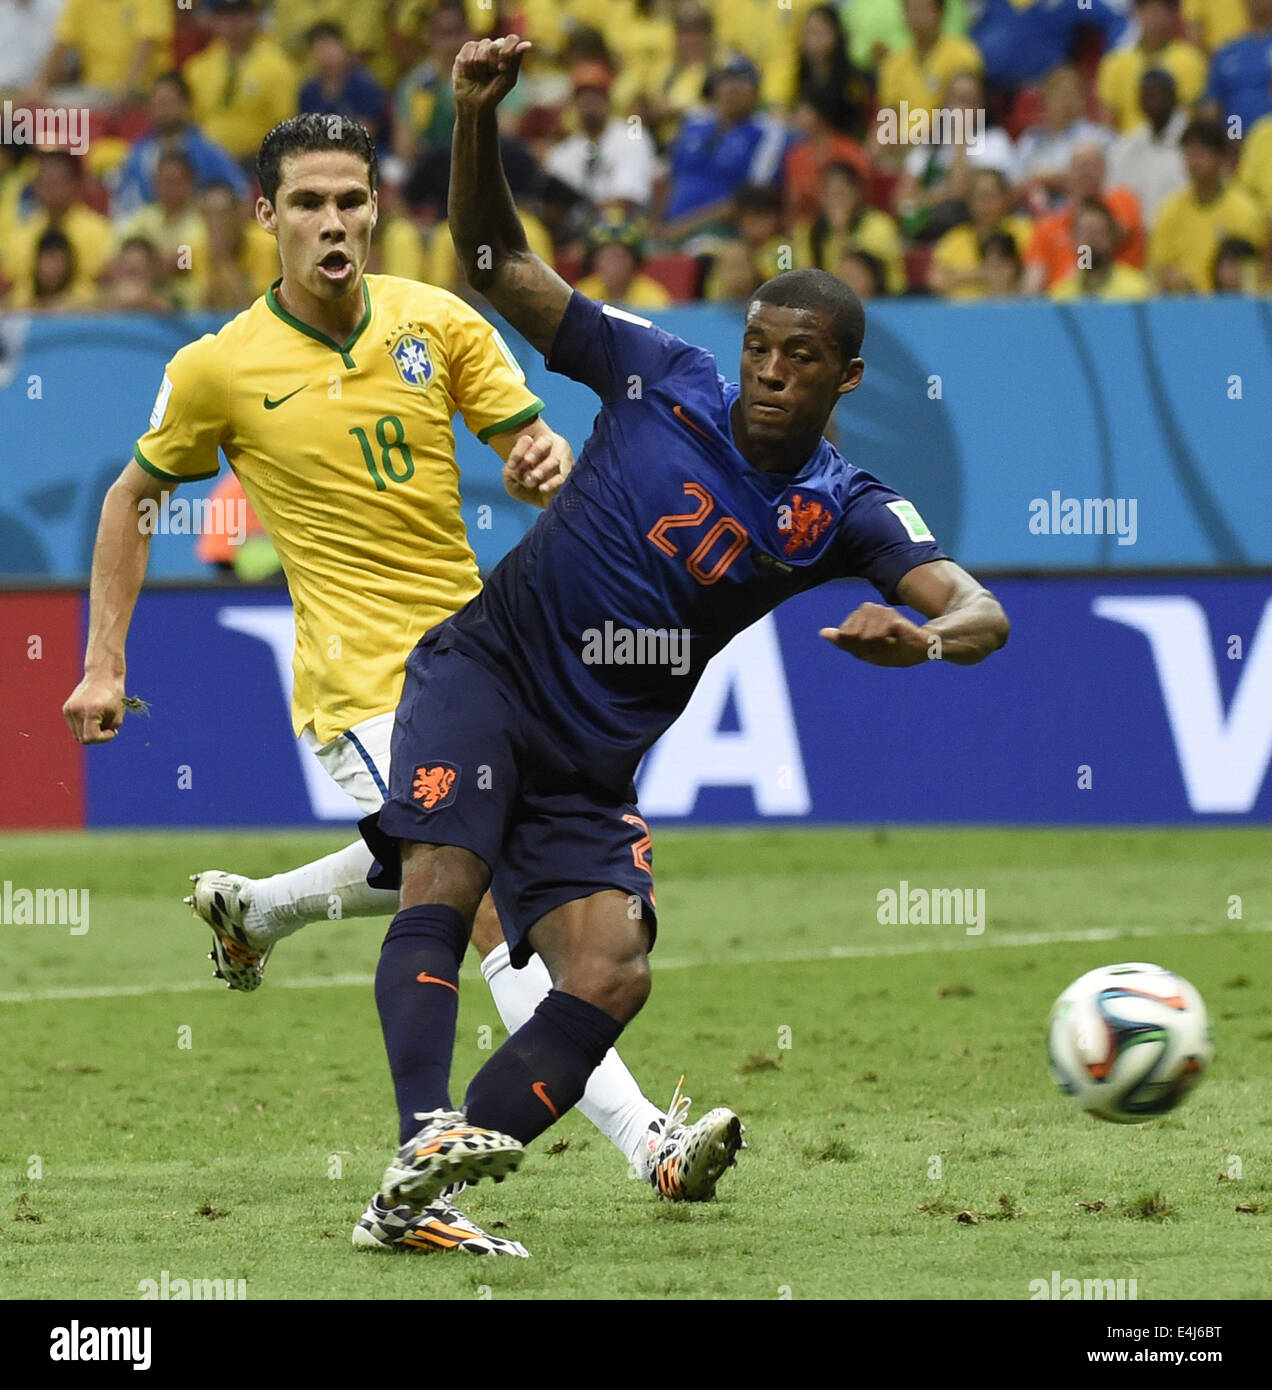 Brasilia, Brazil. 12th July, 2014. Netherlands' Georginio Wijnaldum vies with Brazil's Hernanes during the third place play-off match between Brazil and Netherlands of 2014 FIFA World Cup at the Estadio Nacional Stadium in Brasilia, Brazil, on July 12, 2014. Netherlands won 3-0 over Brazil and took the third place of the tournament on Saturday. Credit:  Yang Lei/Xinhua/Alamy Live News Stock Photo